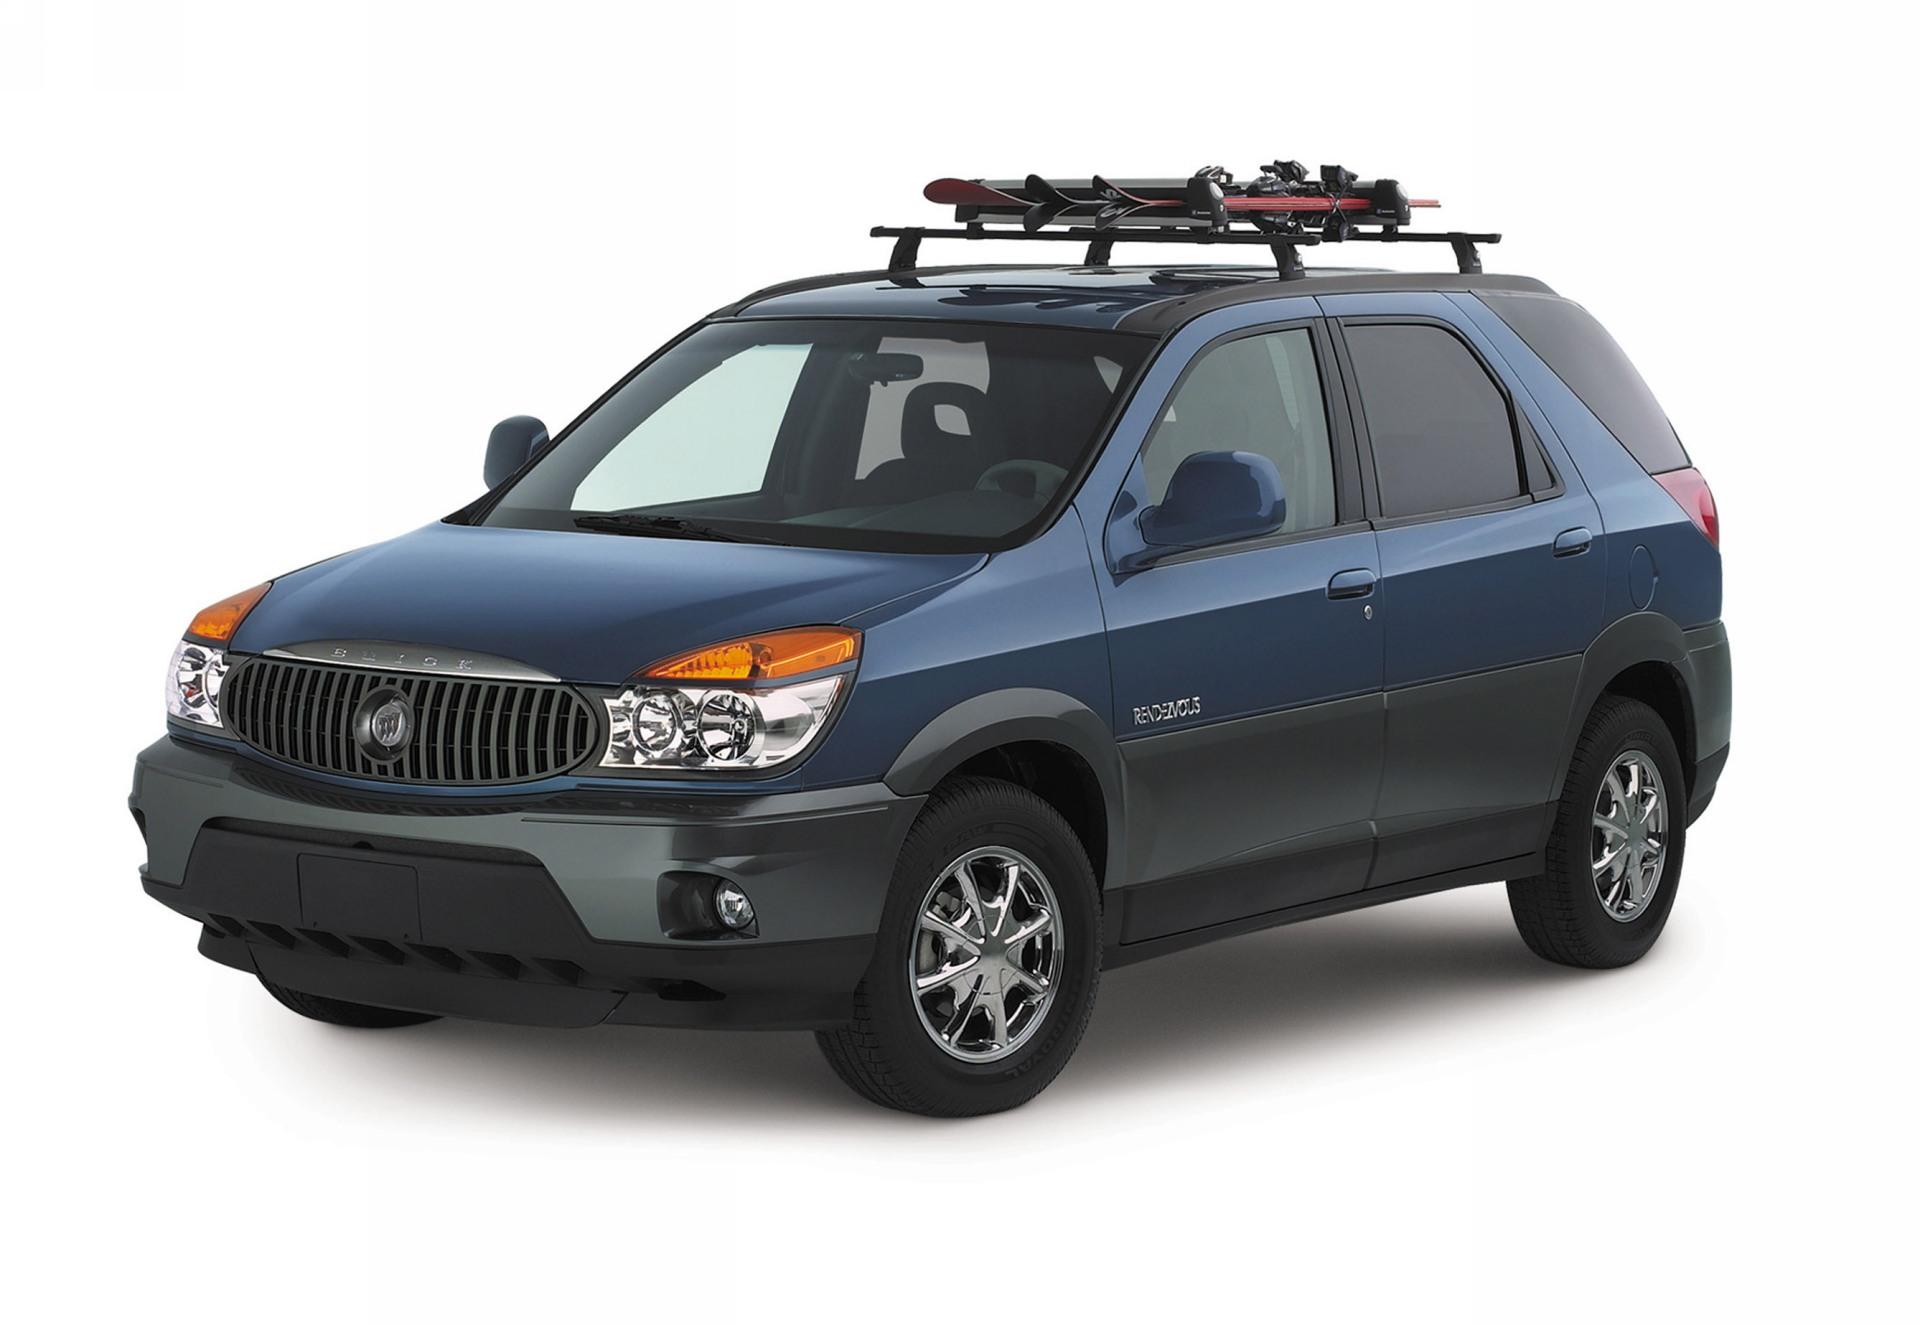 Buick Rendezvous technical specifications and fuel economy